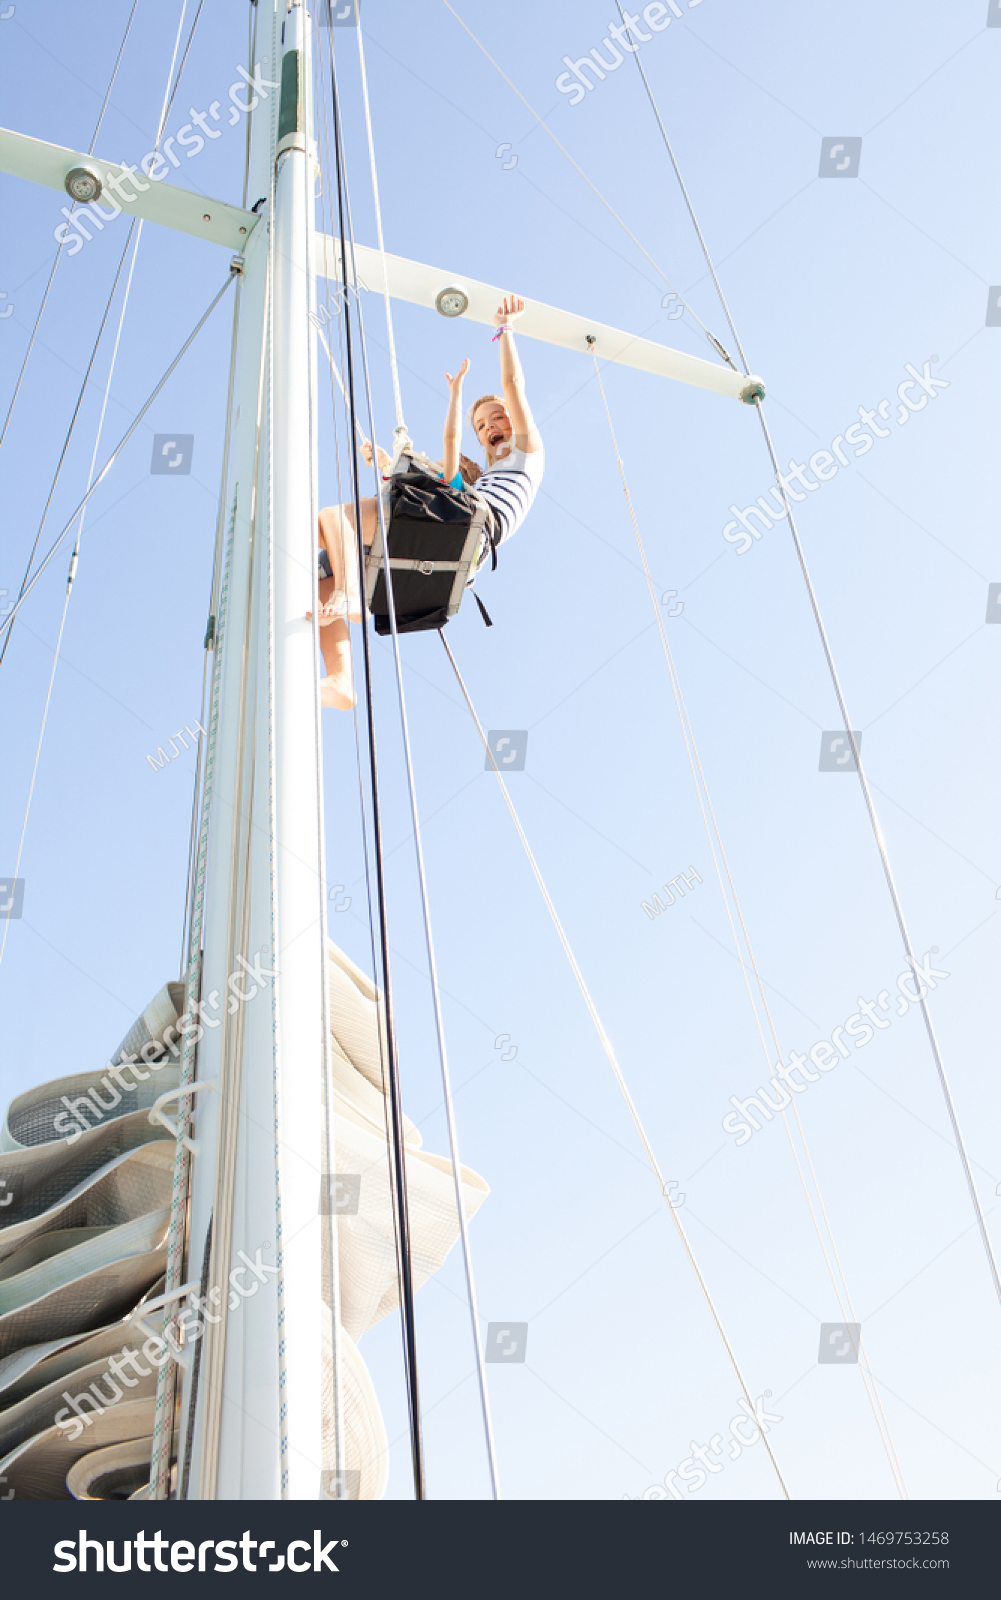 Brother and sister together high up climbing mast on luxury sailing yacht, joyful expressions against sunny blue sky, outdoors. Family summer adventure, boat activities leisure recreation lifestyle. #1469753258